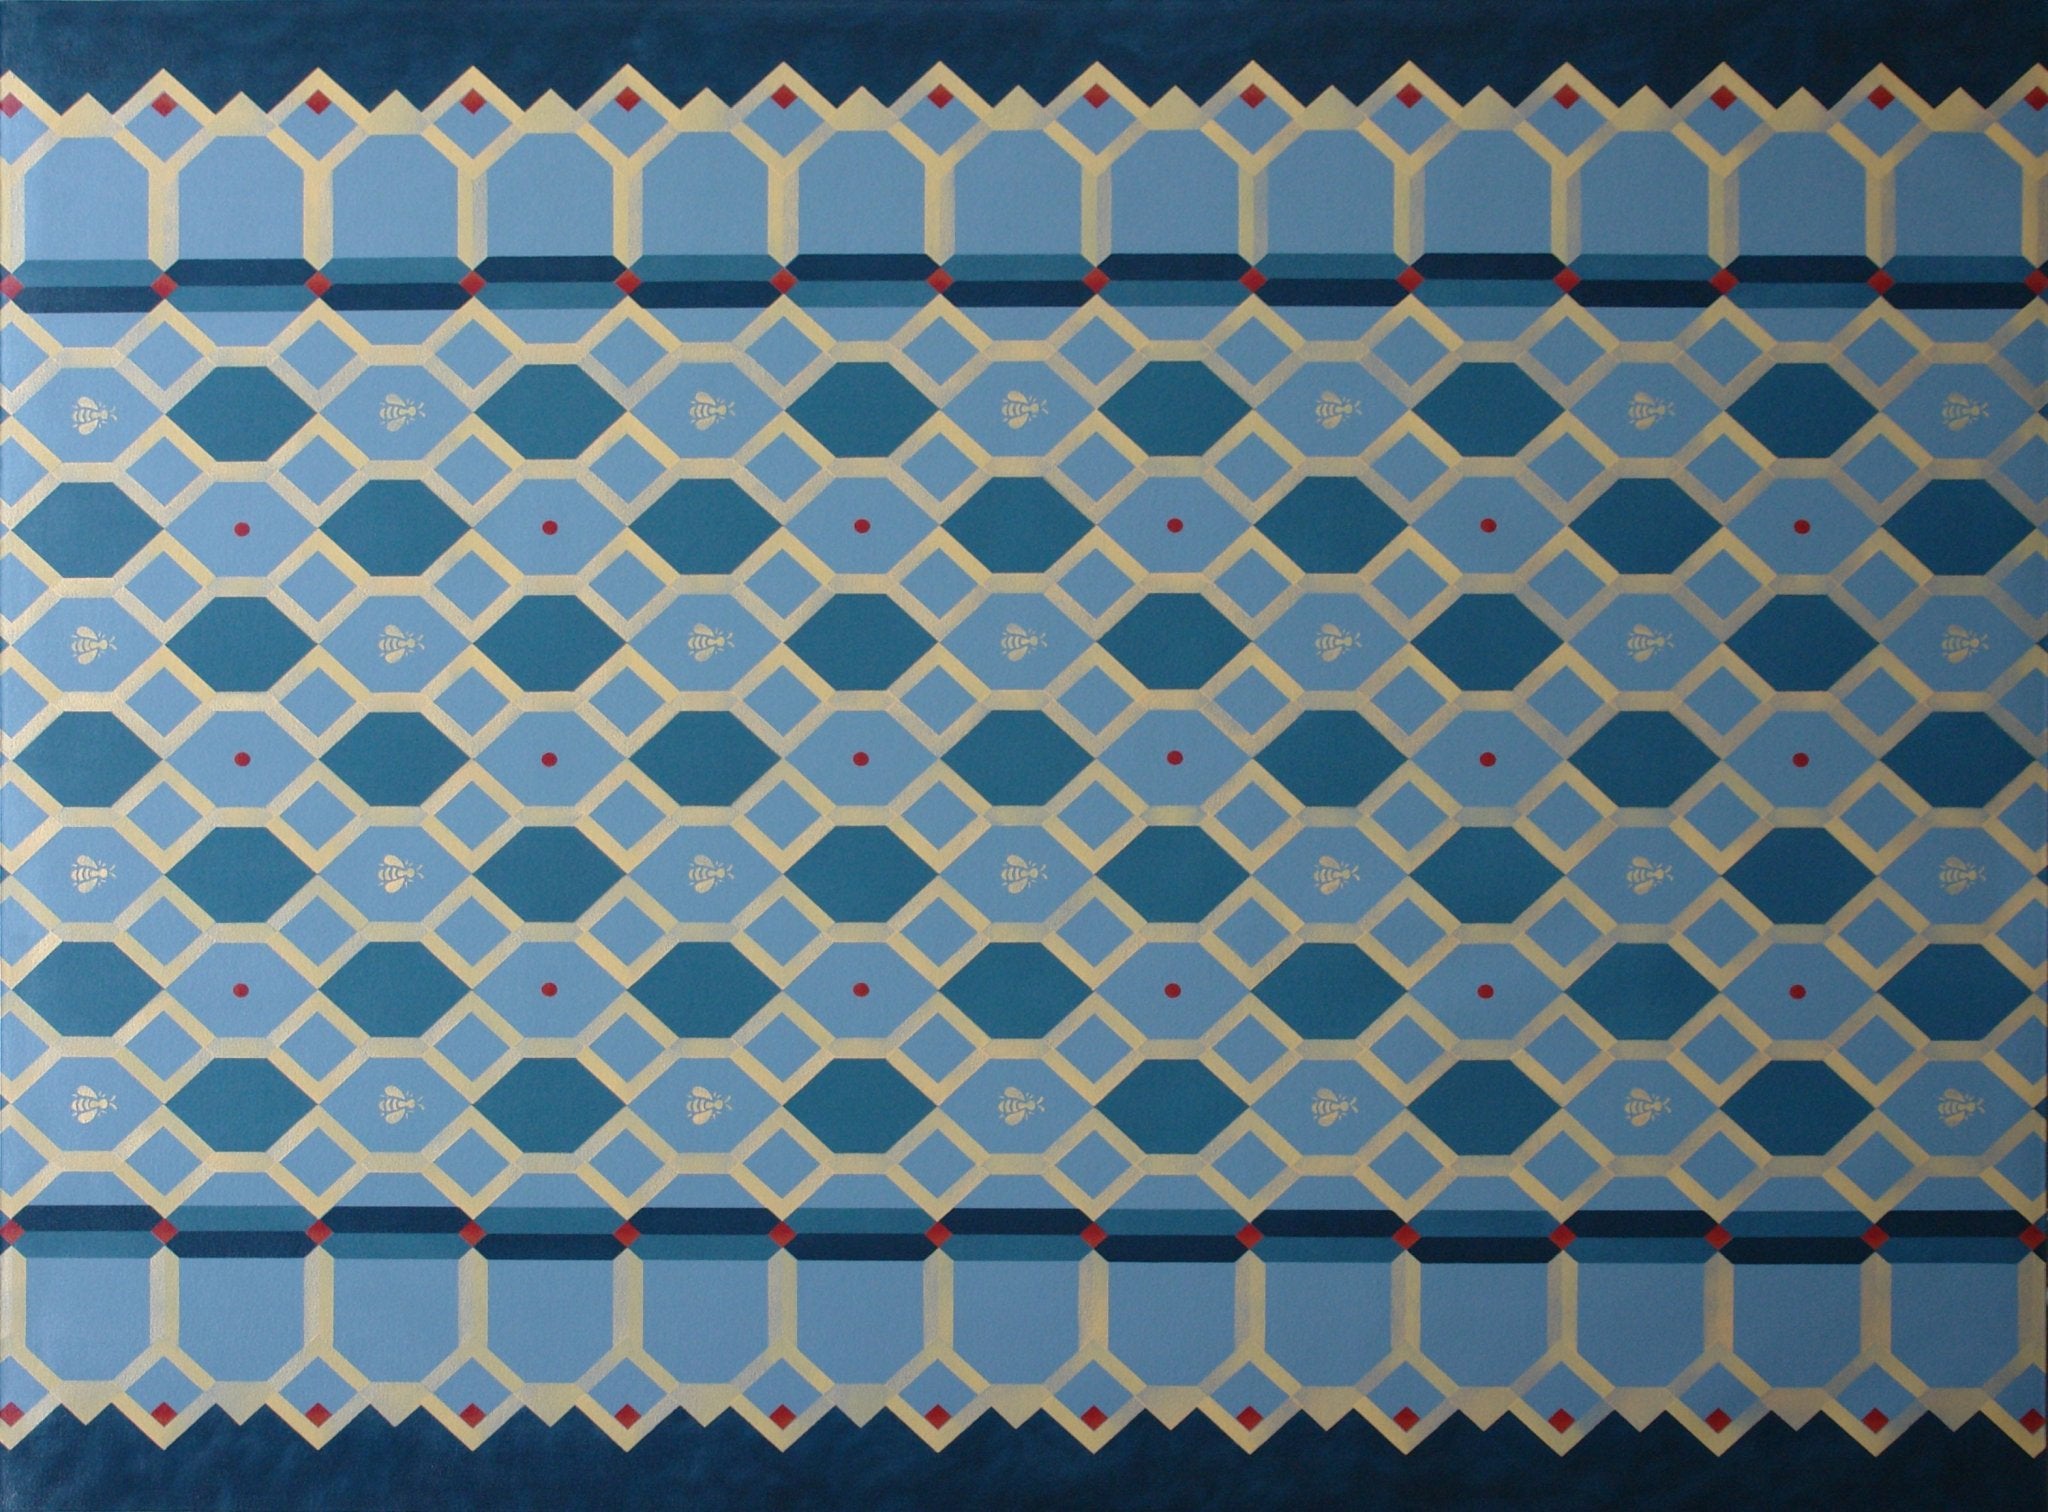 The full image of Honeycomb Floorcloth #2.